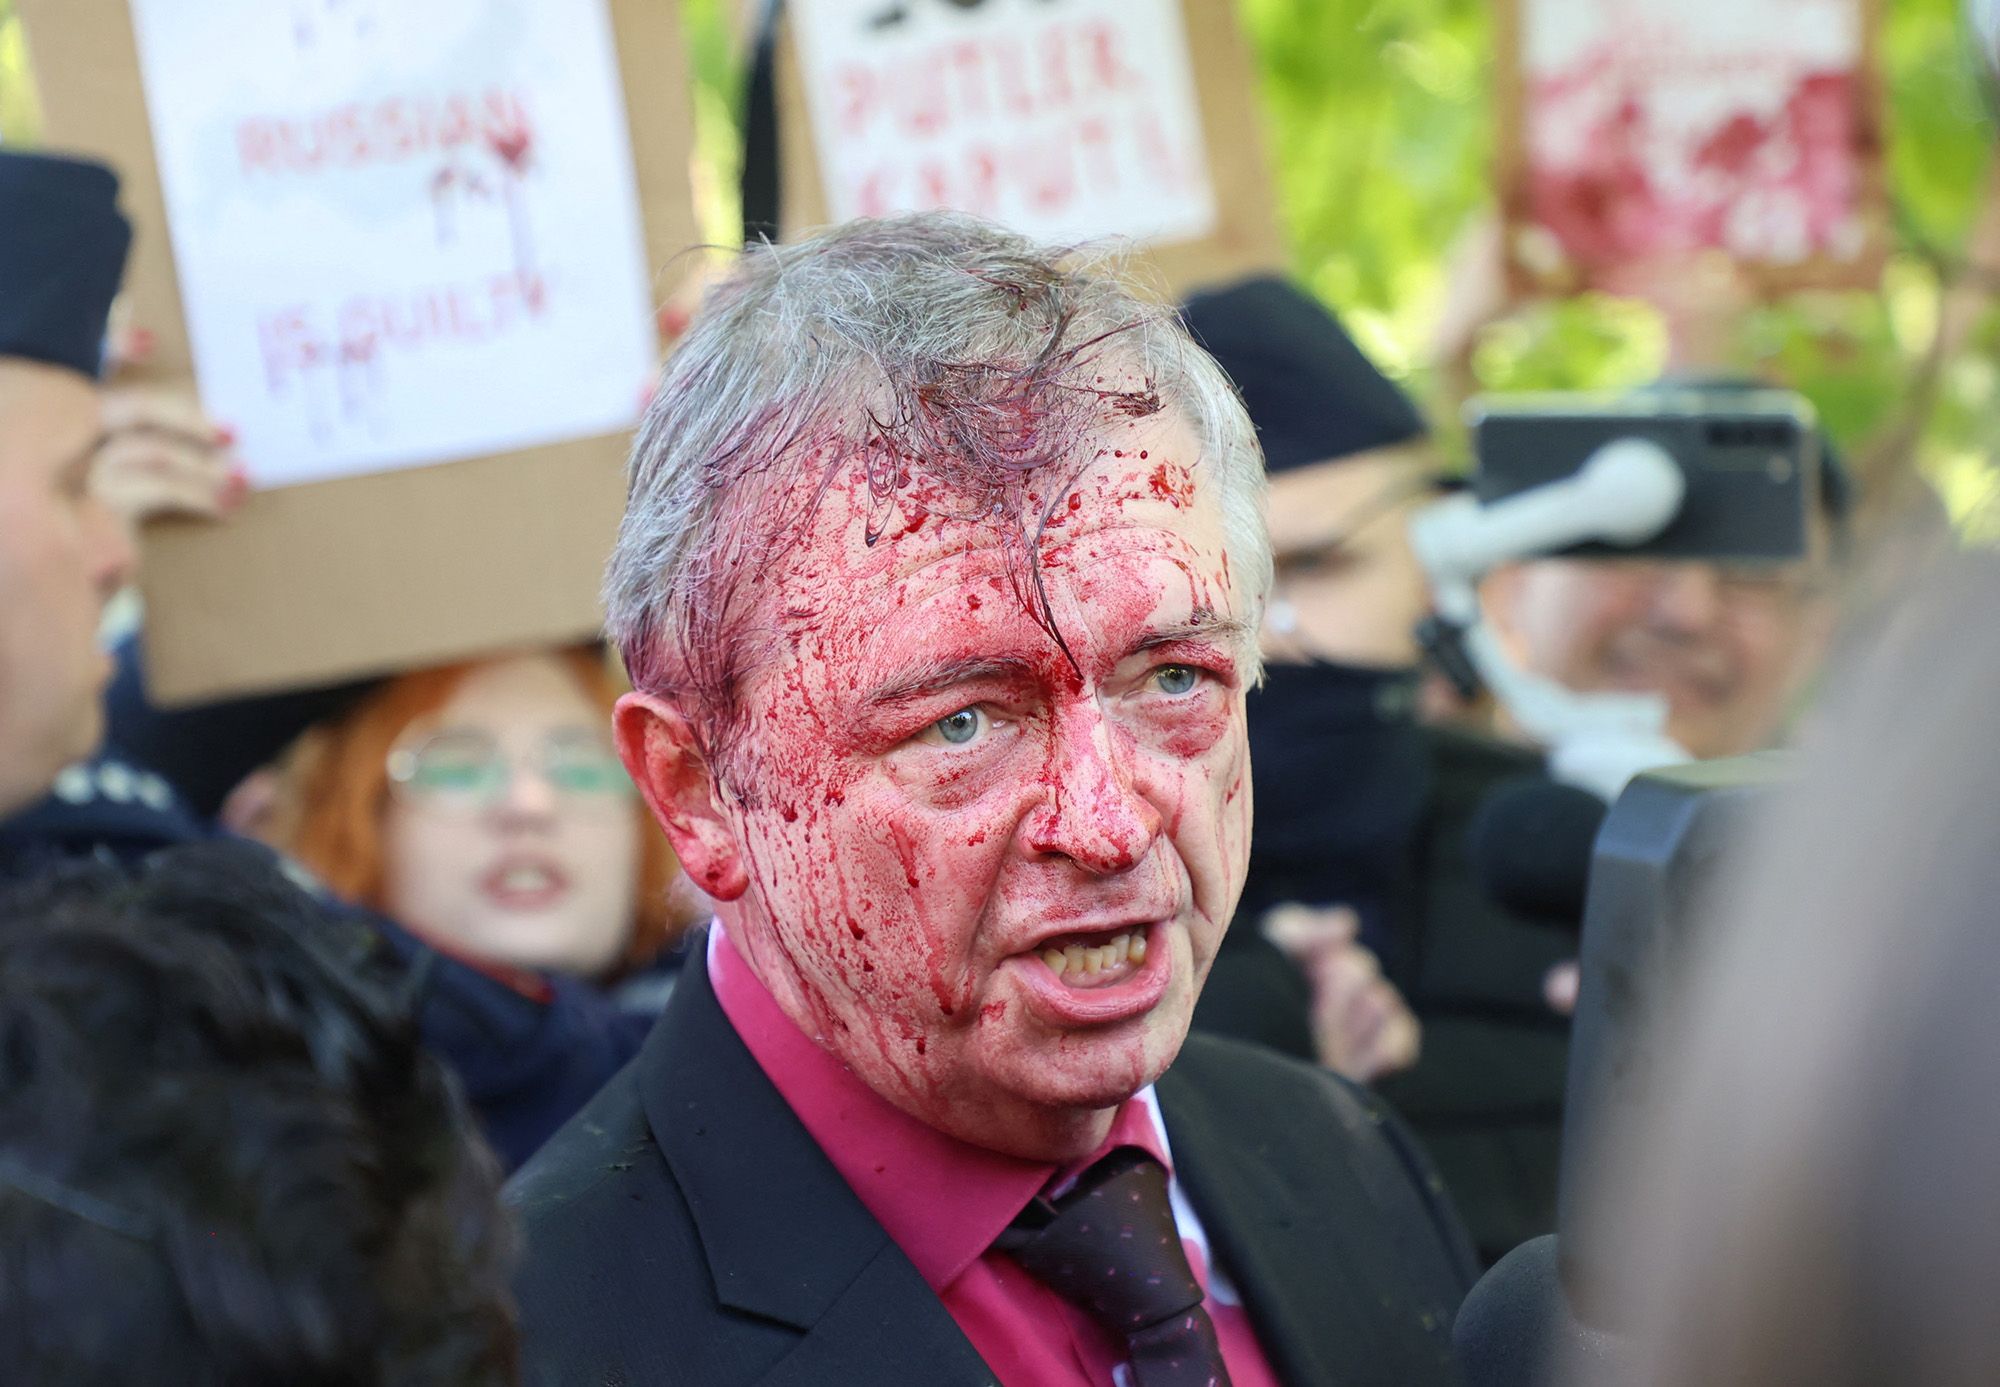 Russia's ambassador to Poland Sergey Andreev is covered in red substance thrown by protesters as he came to celebrate Victory day at the Soviet Military Cemetery in Warsaw, Poland, on May 9.